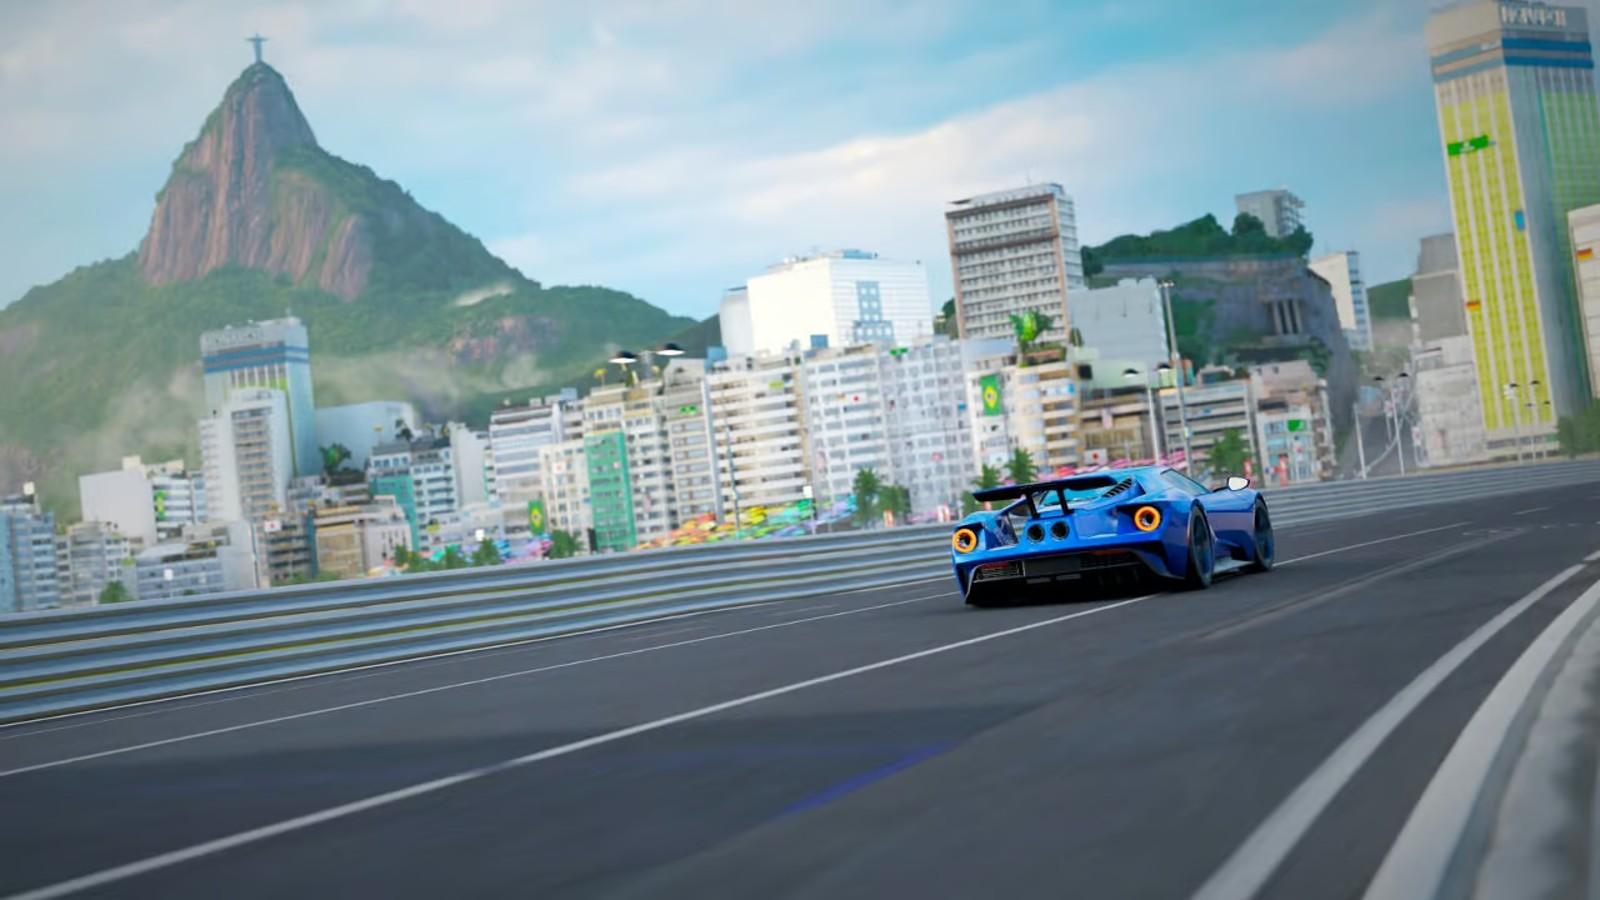 A promotional image from Forza Motorsport featuring a car driving round a race track.